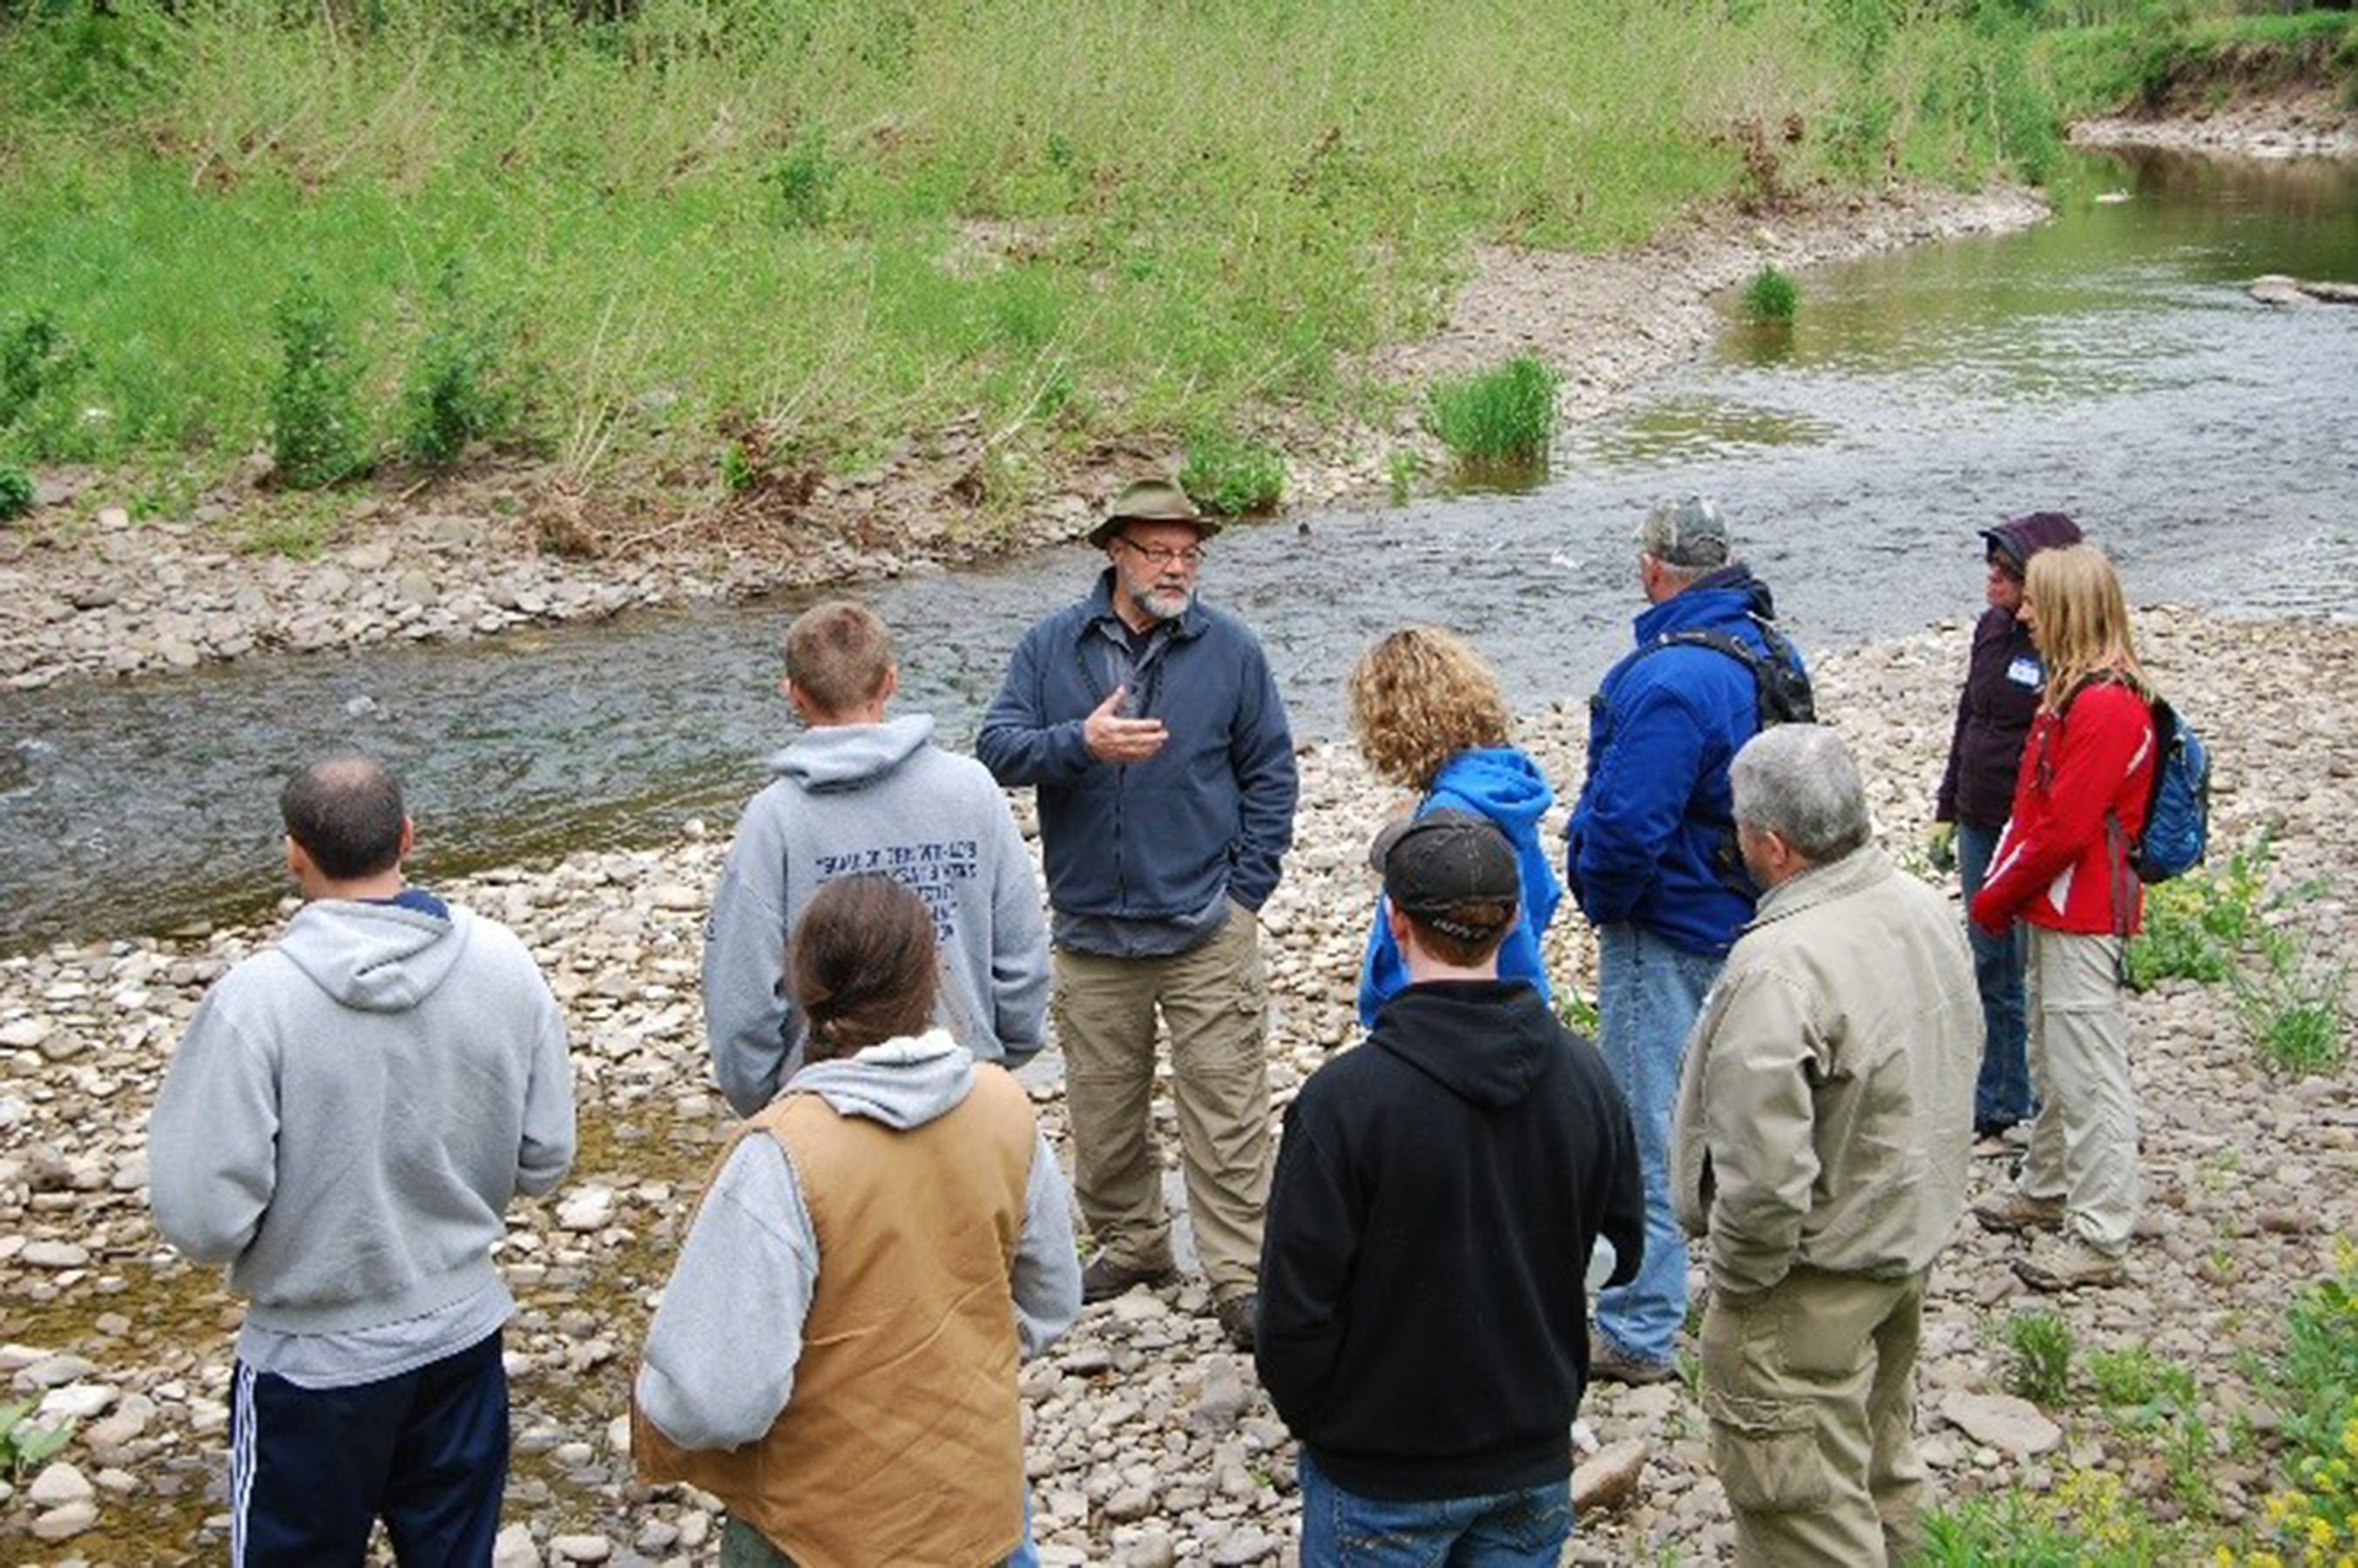 Professor presenting to a group of students while standing on a river bank